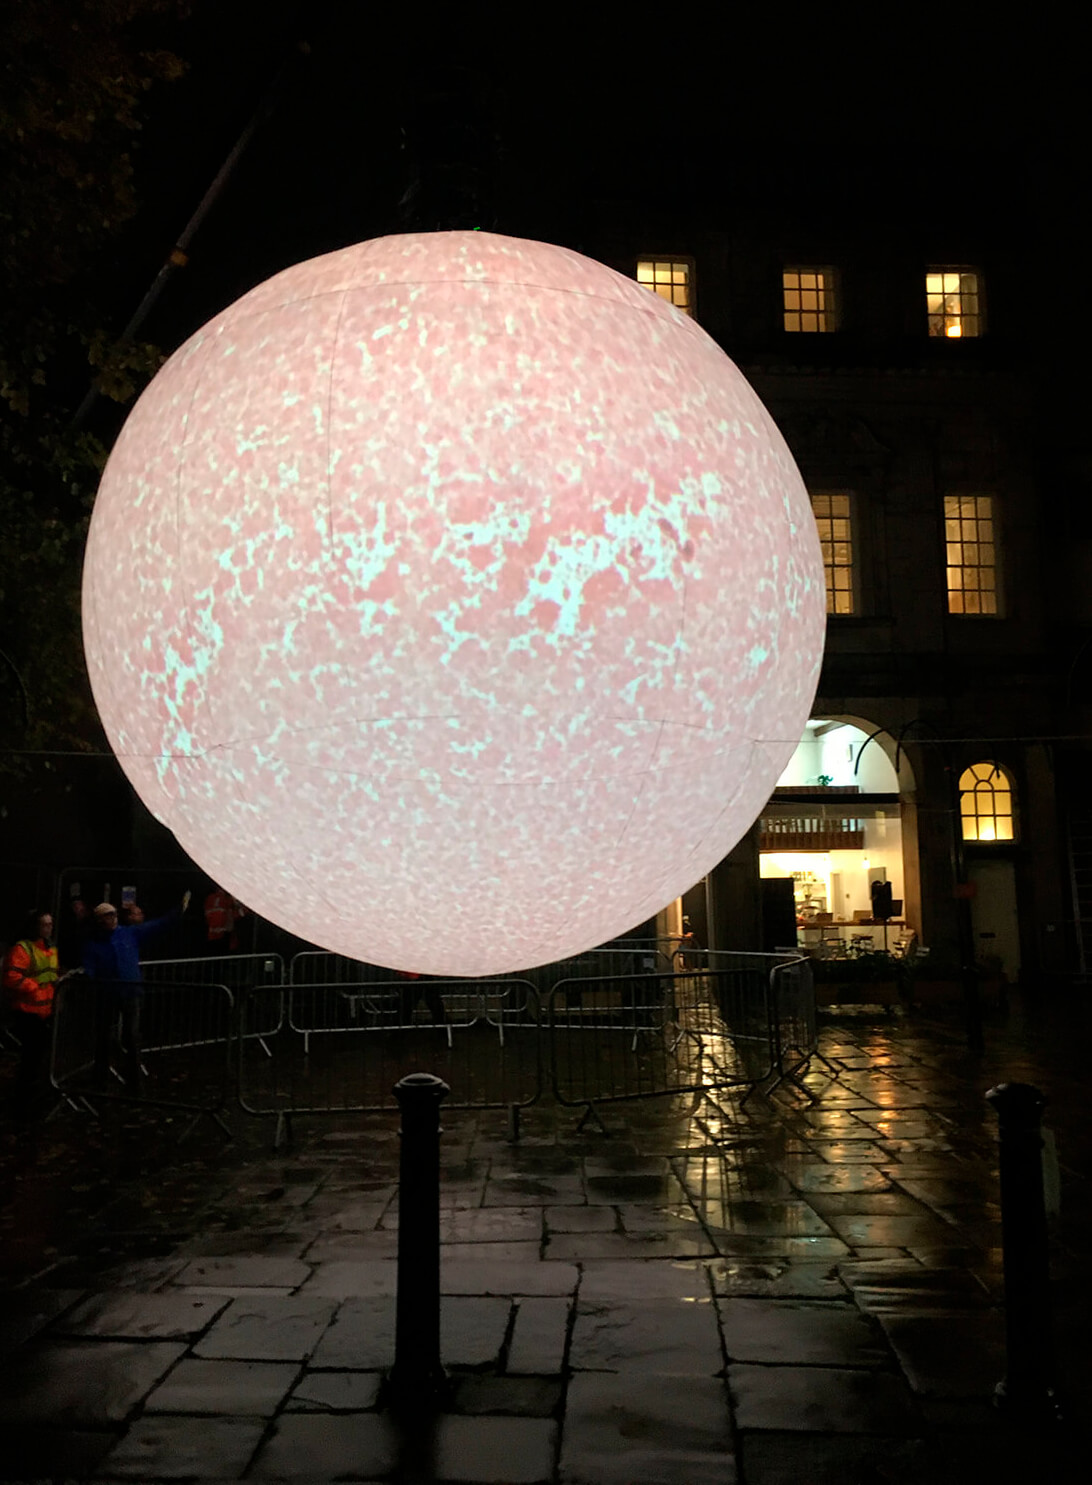 Photograph of SUN in a public space at night